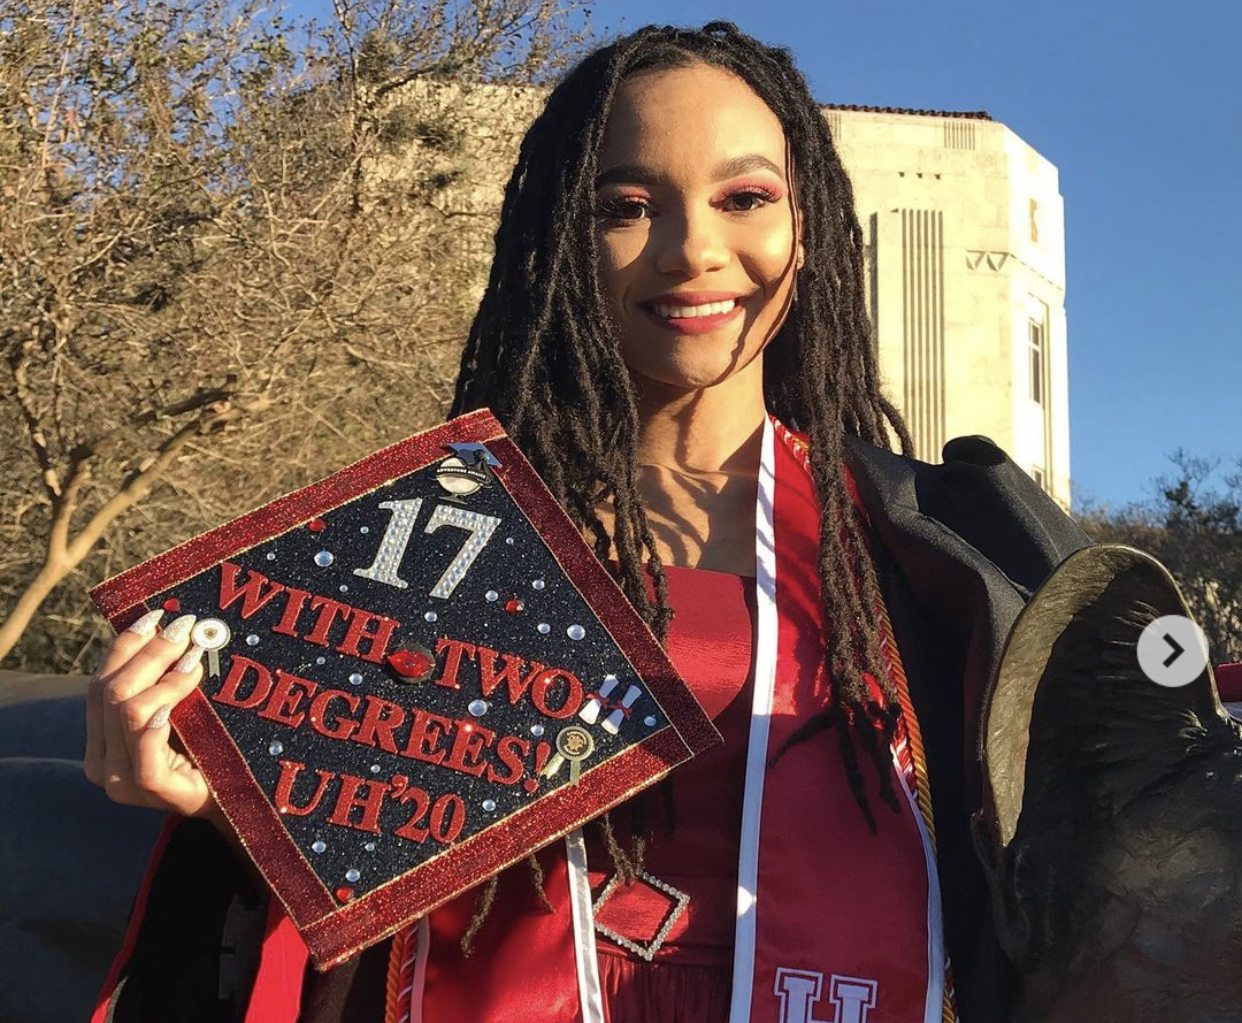 18-Year-Old Salenah Cartier Becomes Youngest Person to Earn Master’s Degree from University of Houston